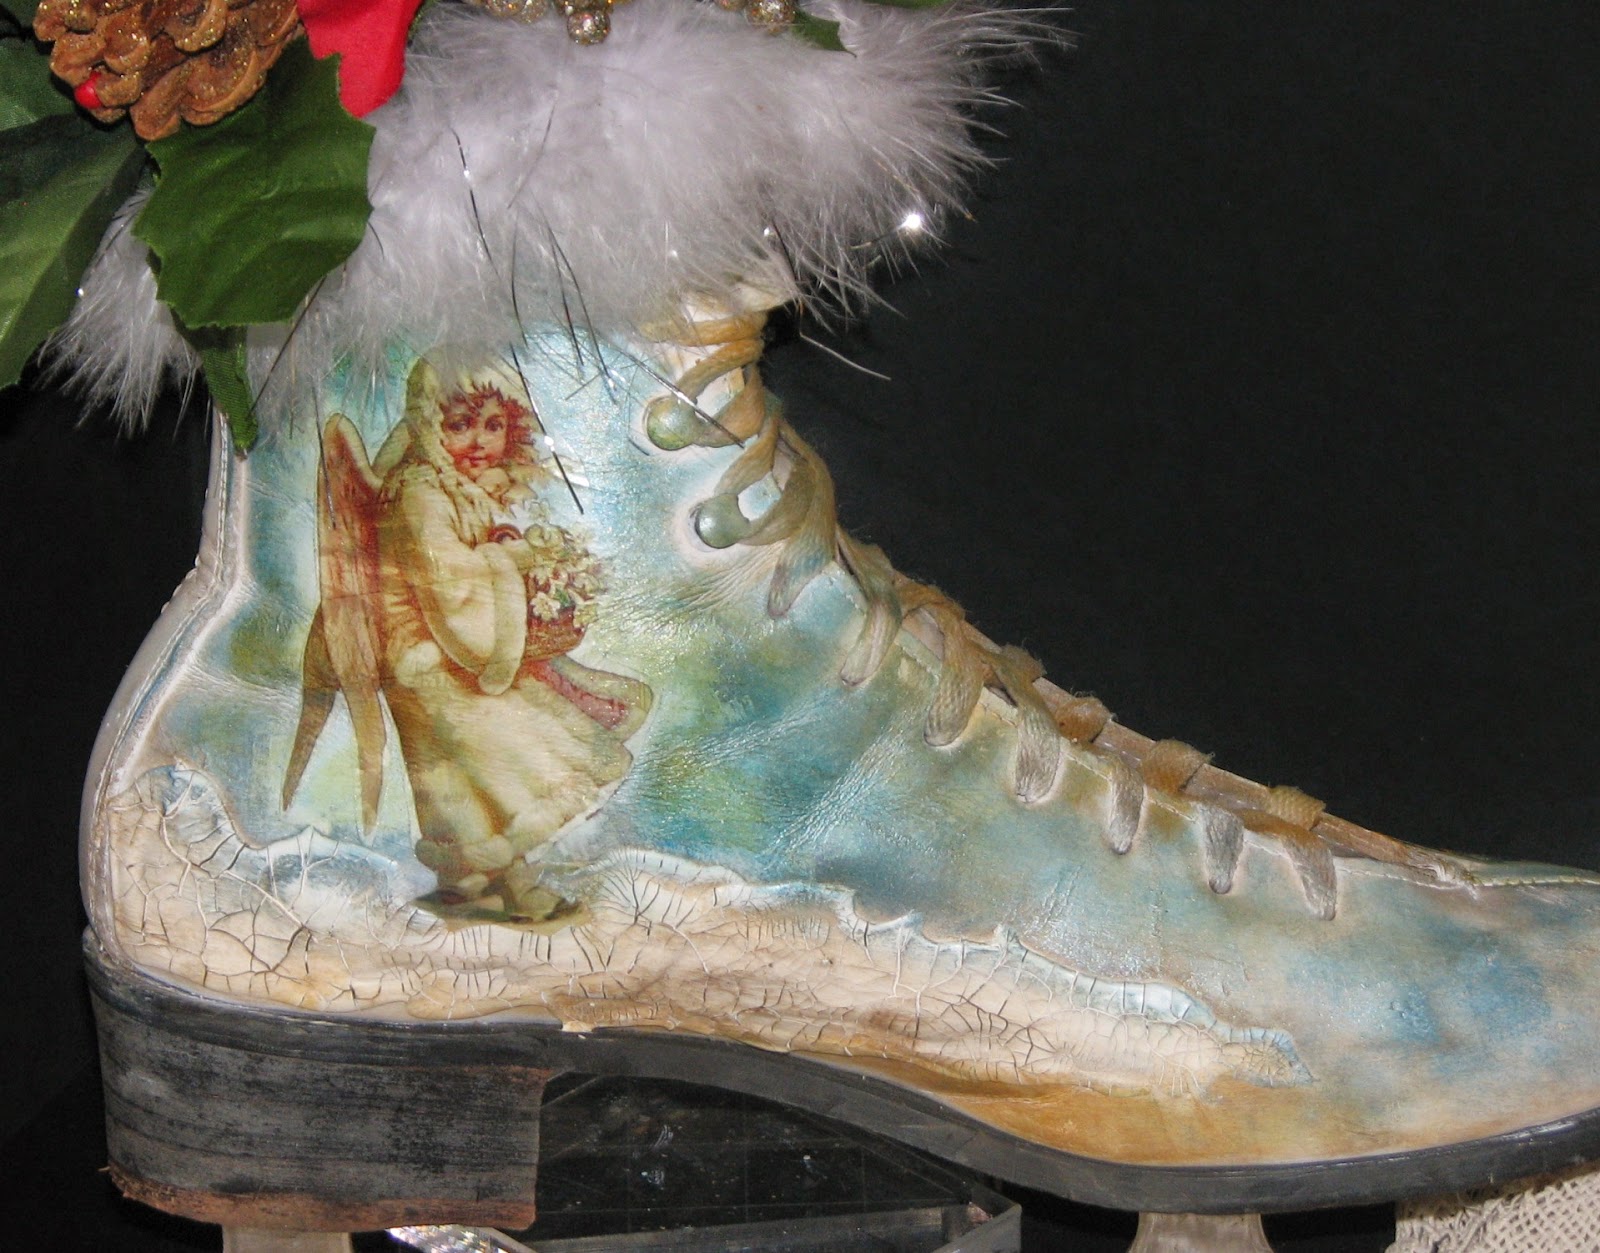 https://discoverthedinosaurs.com/what-to-do-with-old-ice-skates/